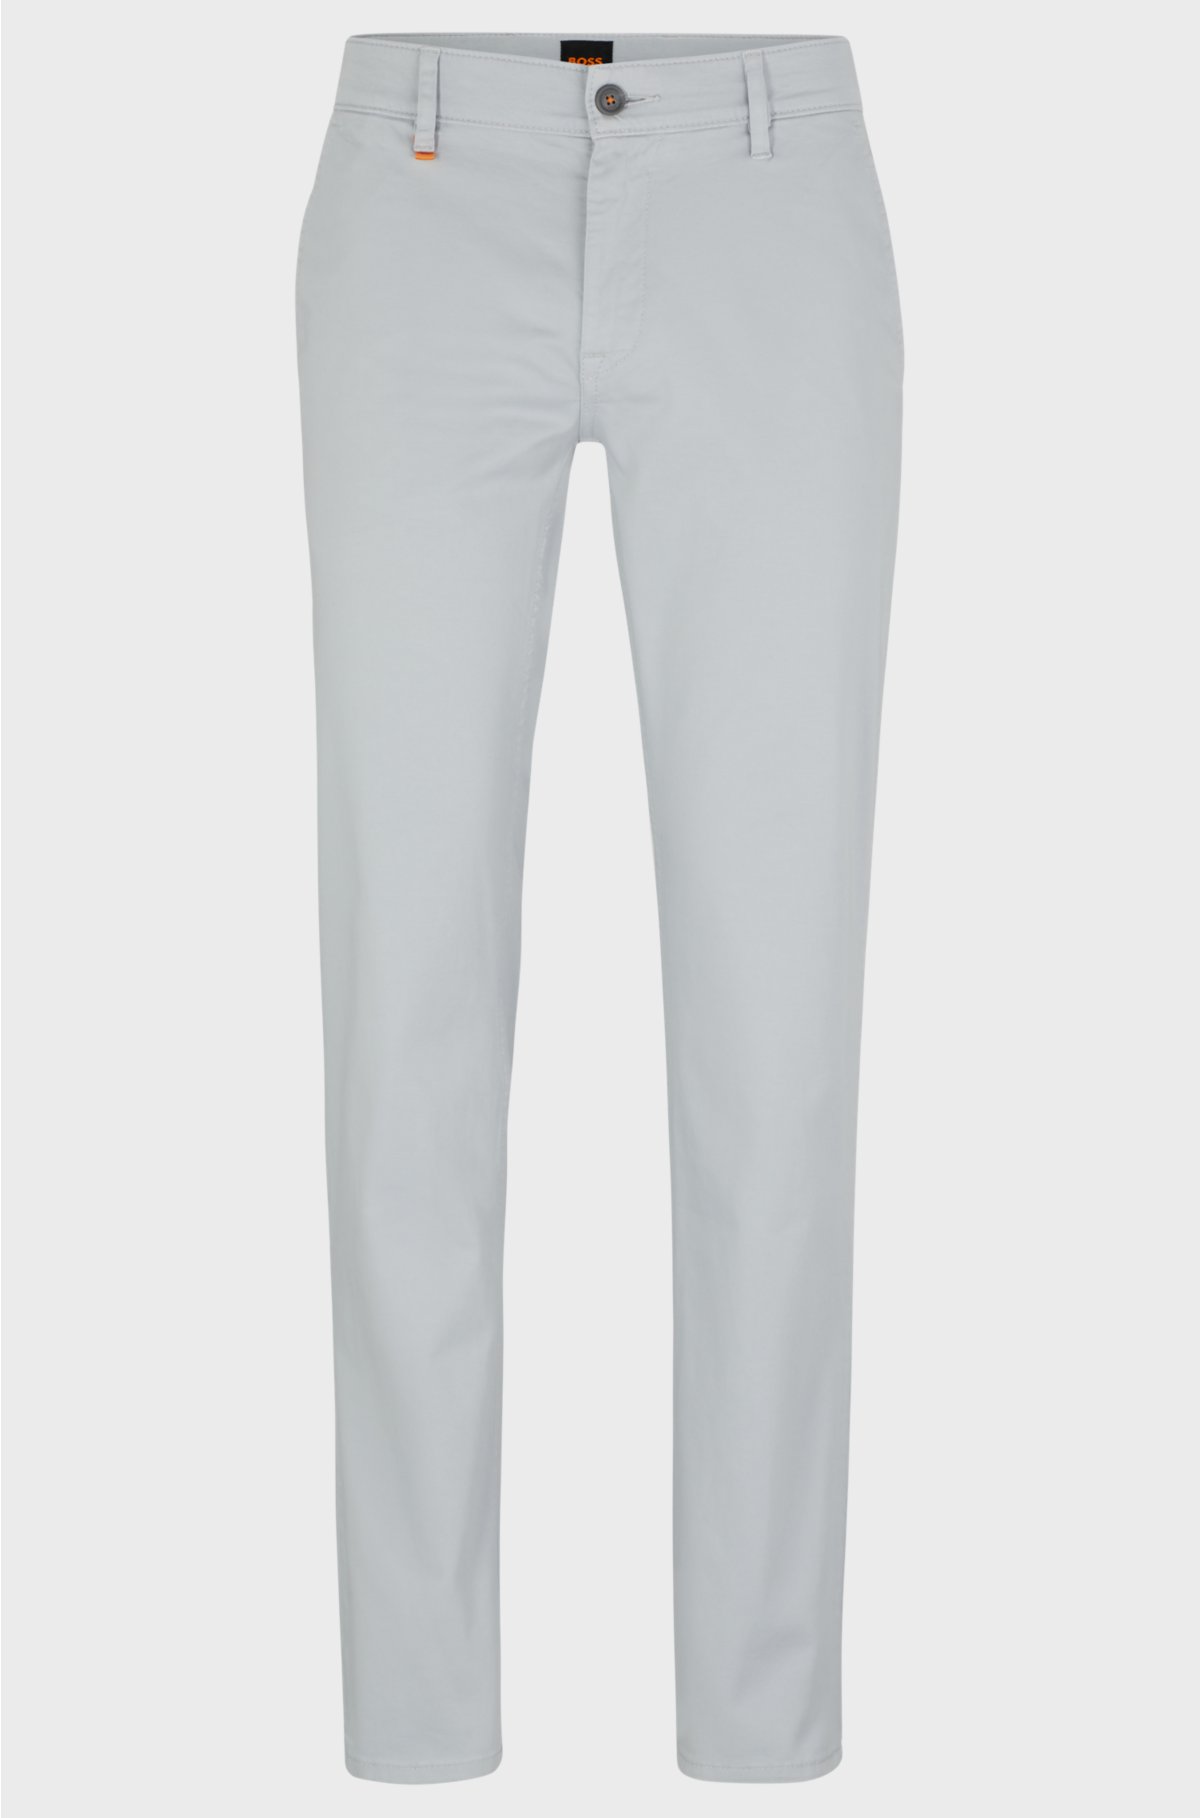 Slim-fit trousers in stretch-cotton satin, Light Grey